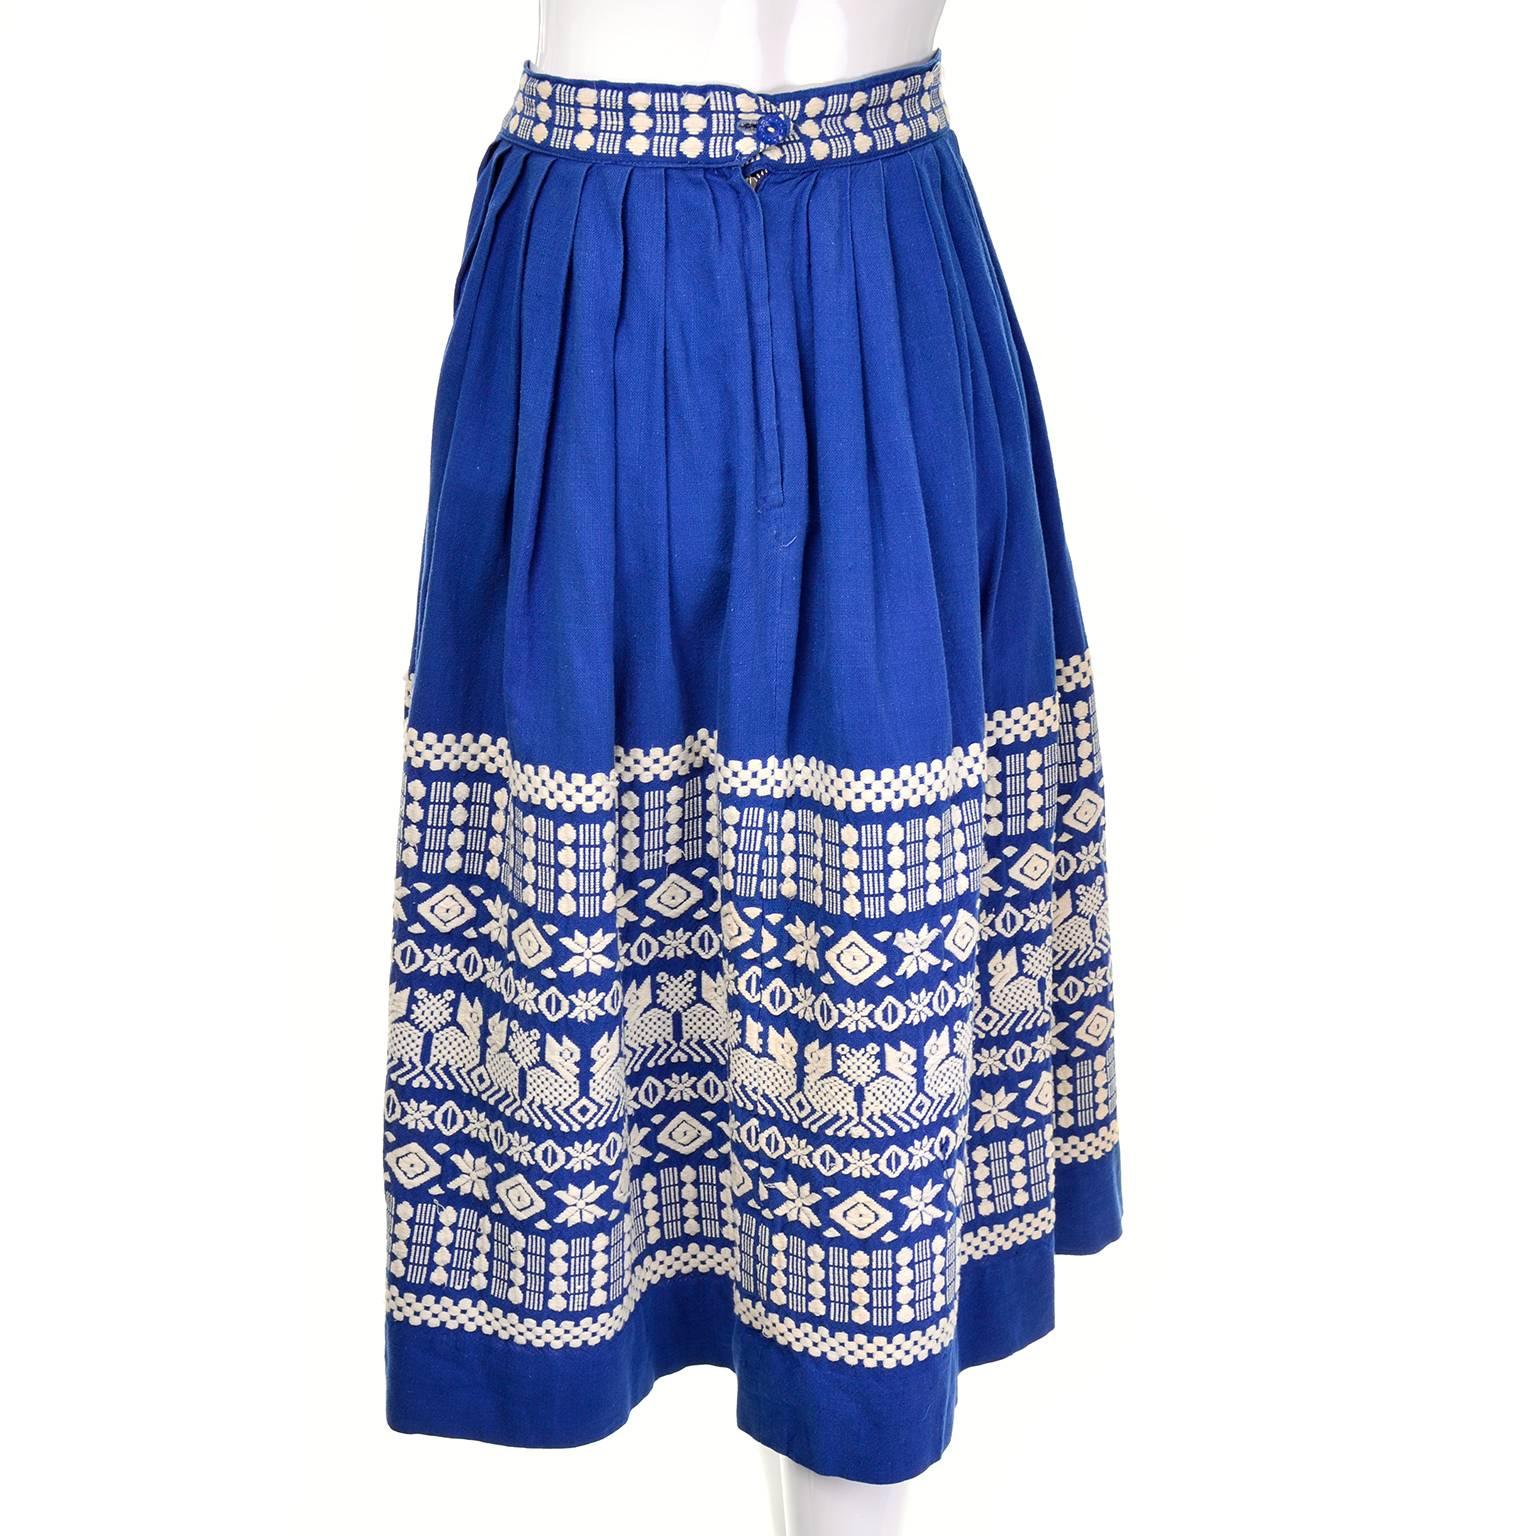 1950s Pelux Guatemala Vintage Folk Blue Skirt Handwoven with White Embroidery In Excellent Condition For Sale In Portland, OR